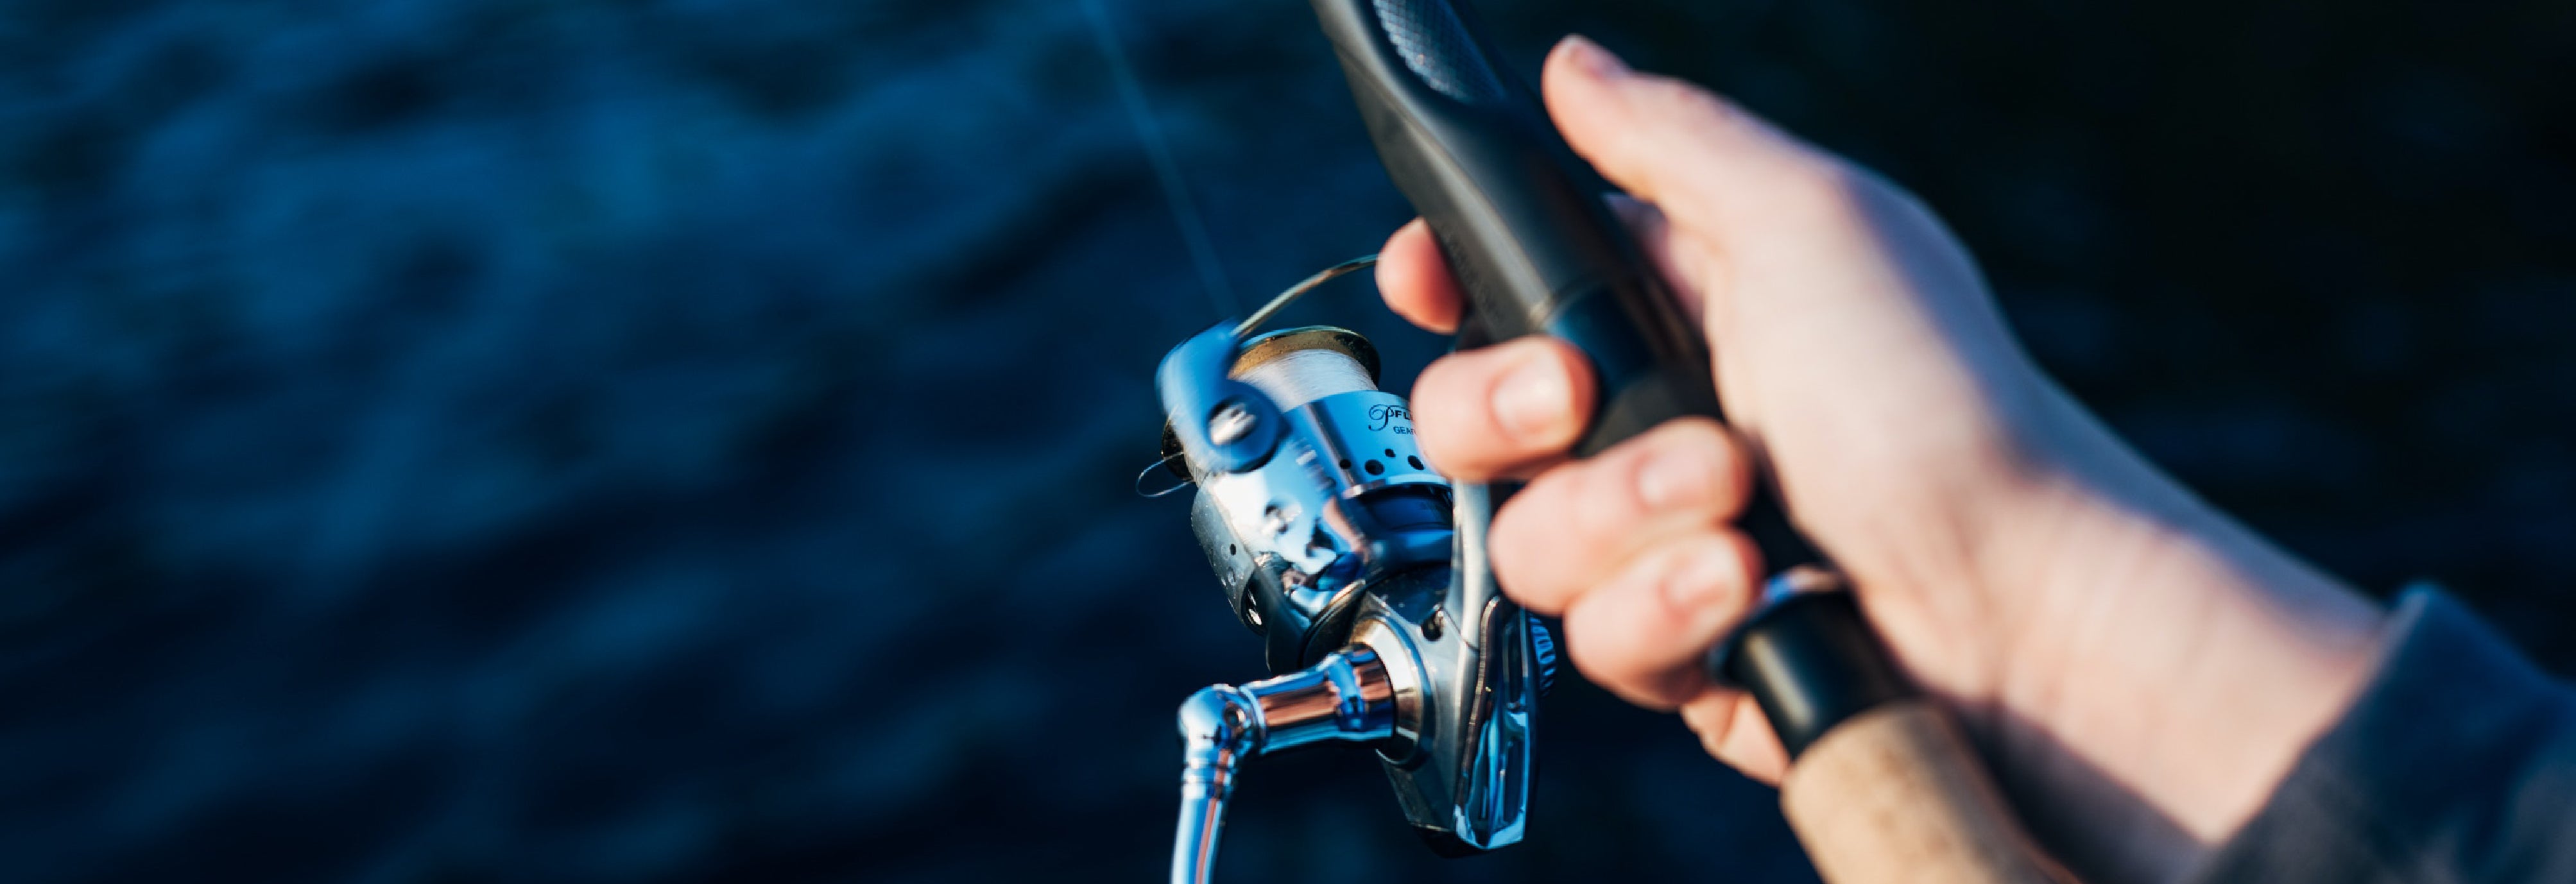 ELEVATE YOUR FISHING GAME WITH ESSENTIAL ACCESSORIES